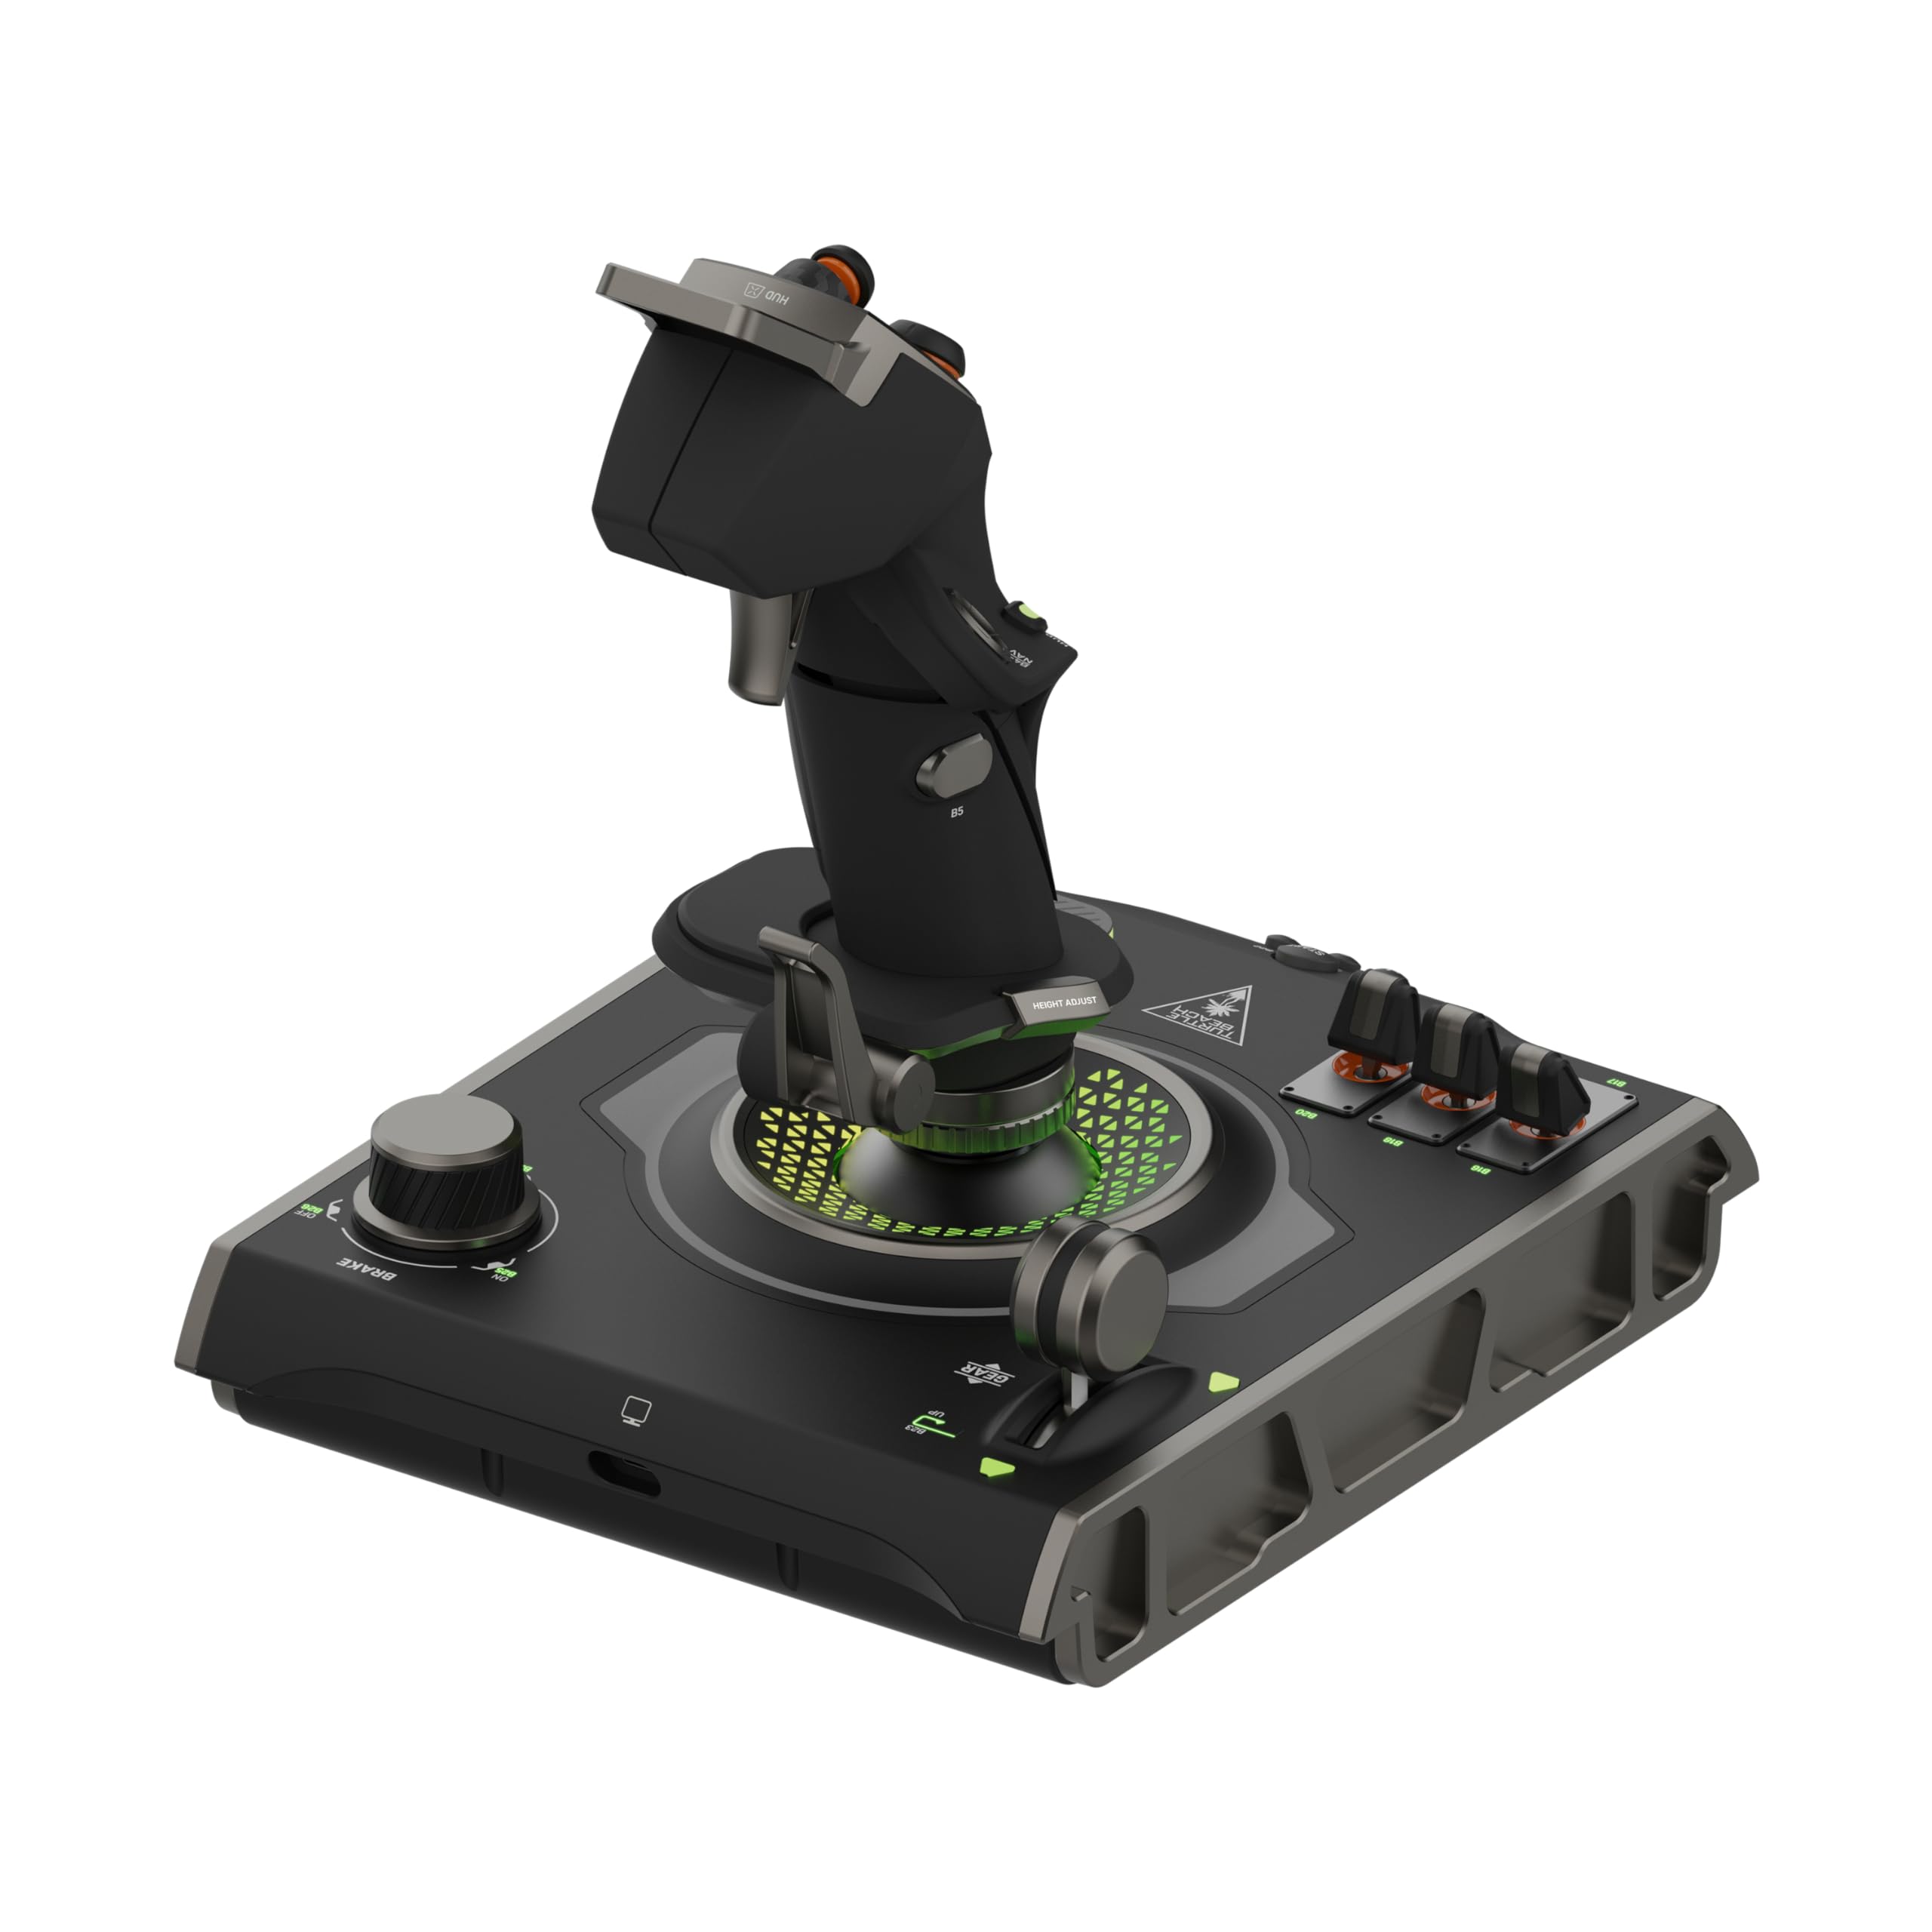 Turtle Beach VelocityOne Flightdeck Universal HOTAS Simulation System Joystick & Throttle for Air & Space Combat Simulation For Windows 10 & 11 PCs – Touch Display & Buttons, 139 Programmable Controls